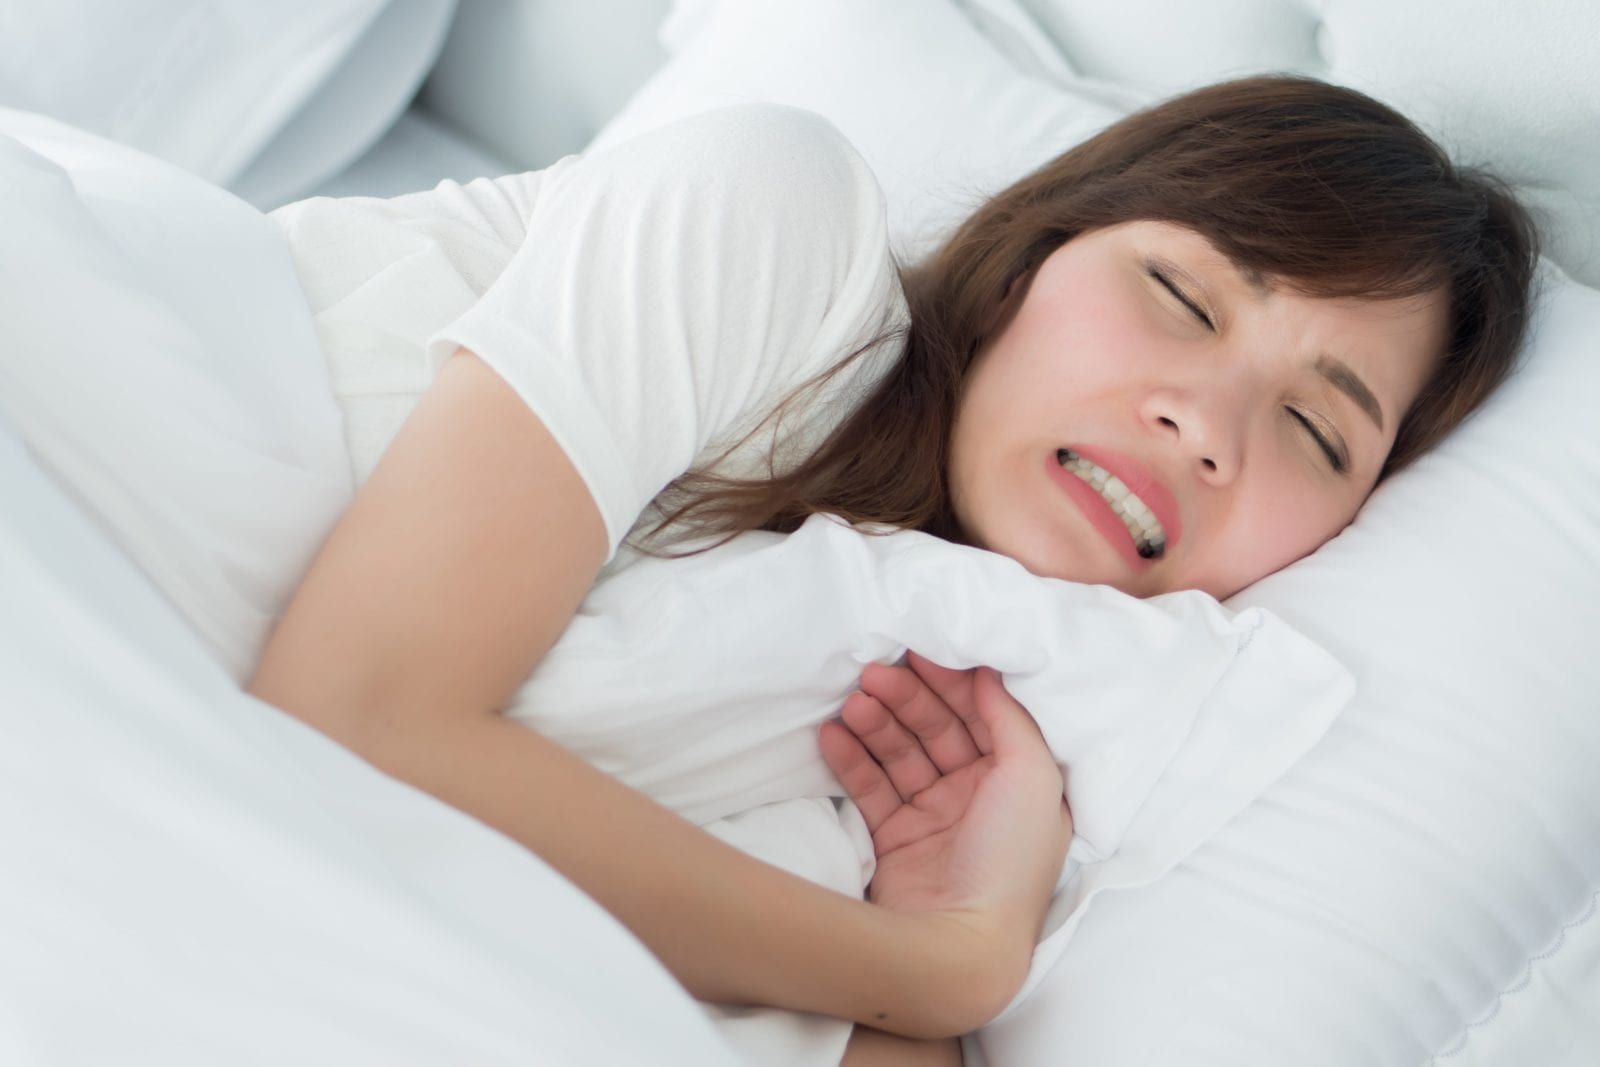 woman sleeping and clenching her teeth together